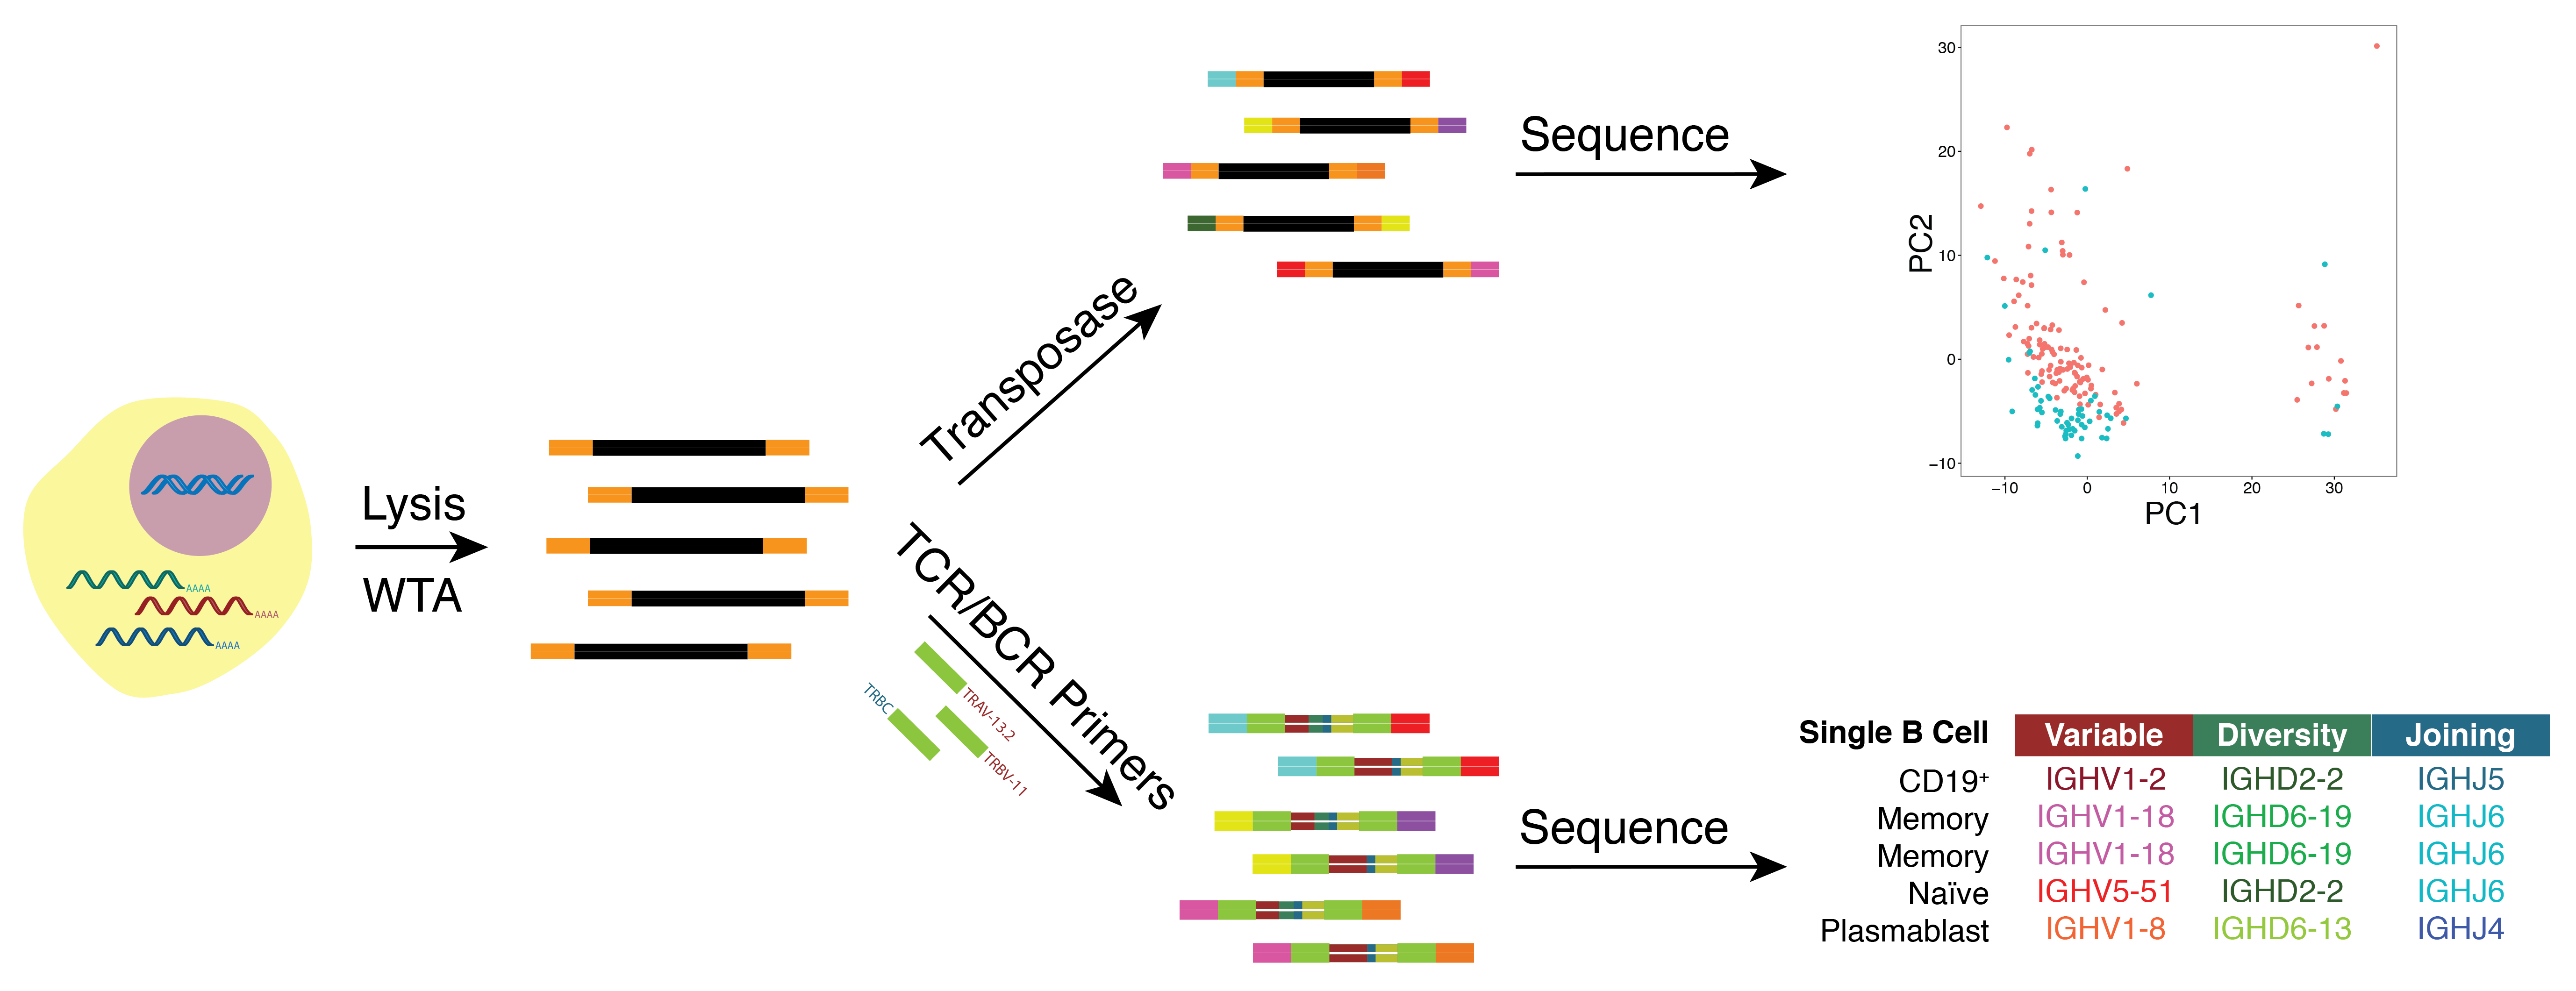 By coupling TCR/BCR amplification techniques with our single-cell transcriptome workflows, we can pair the alpha and beta (or heavy and light) chains from single cells with their gene expression profiles.